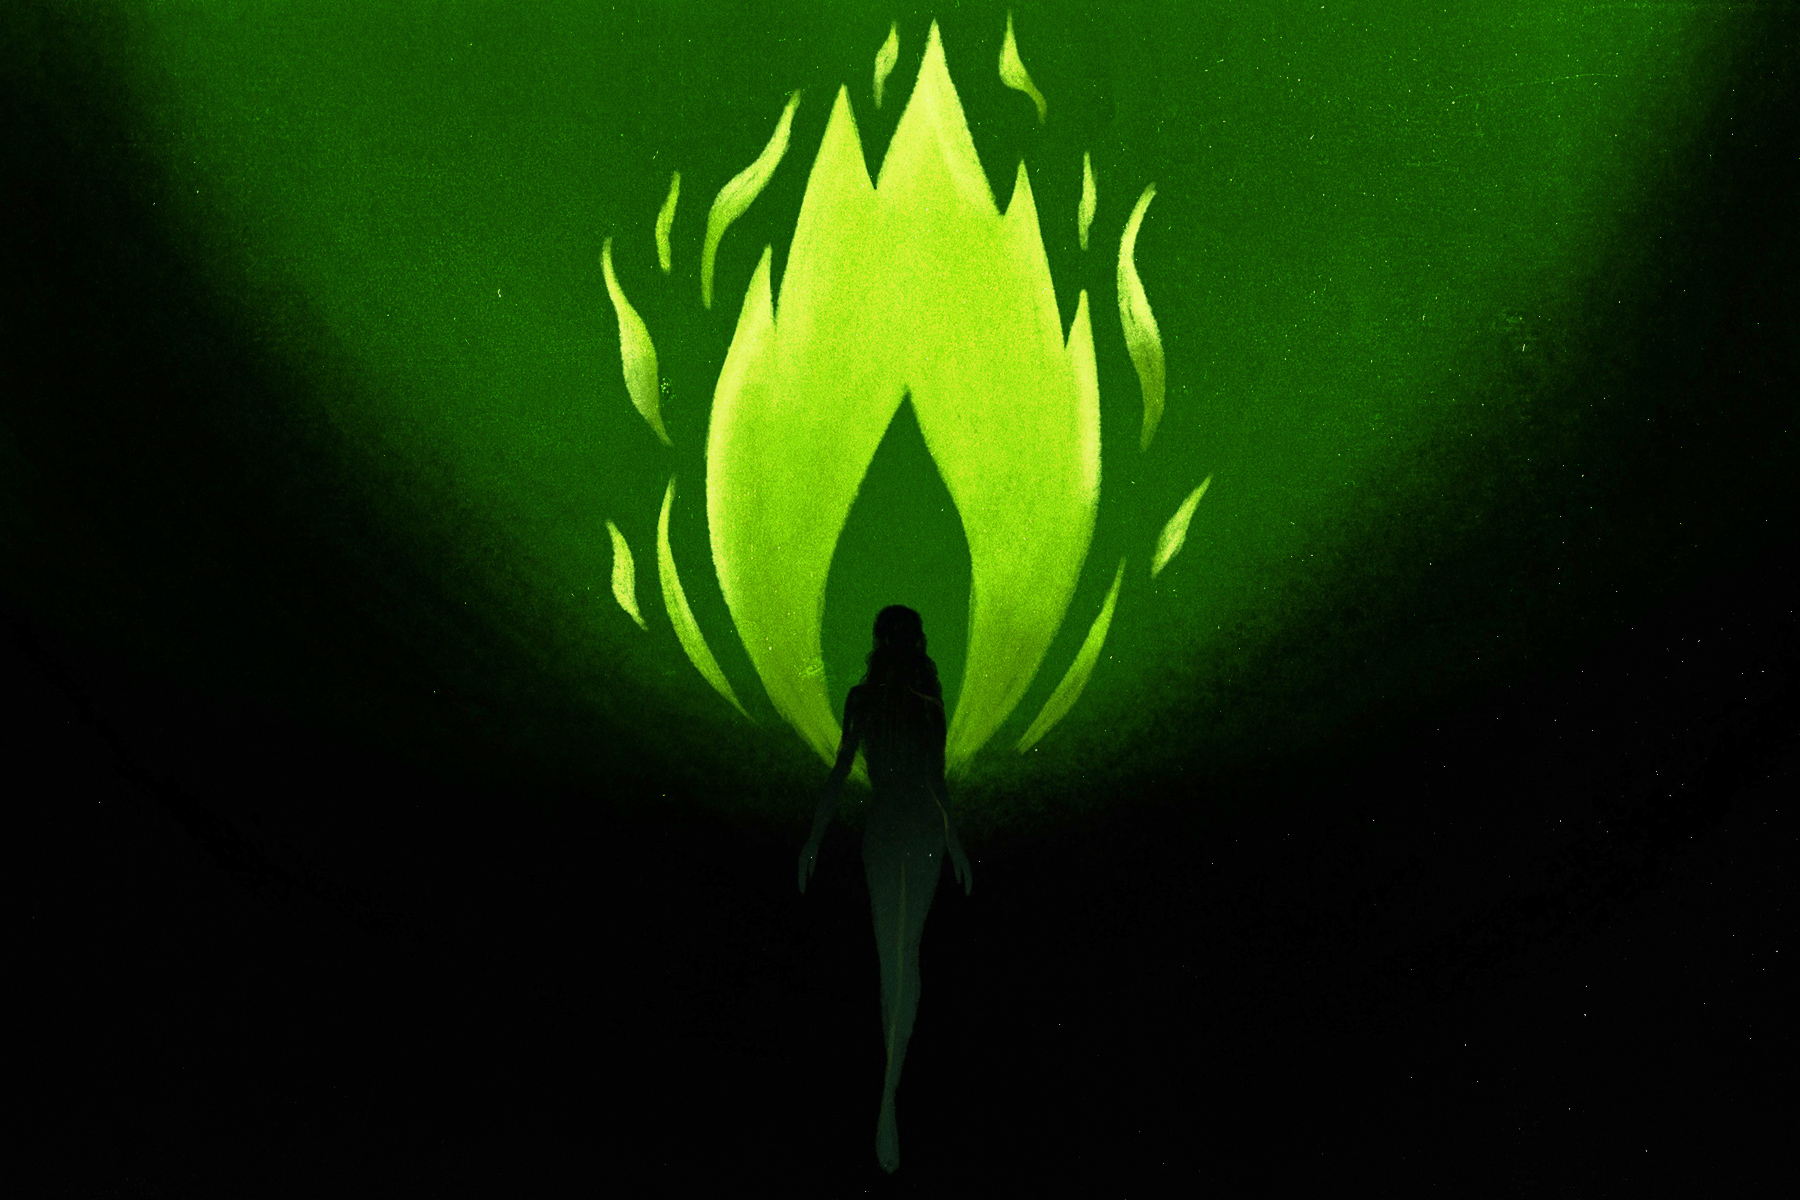 An illustration of a woman's silhouette against a green flame